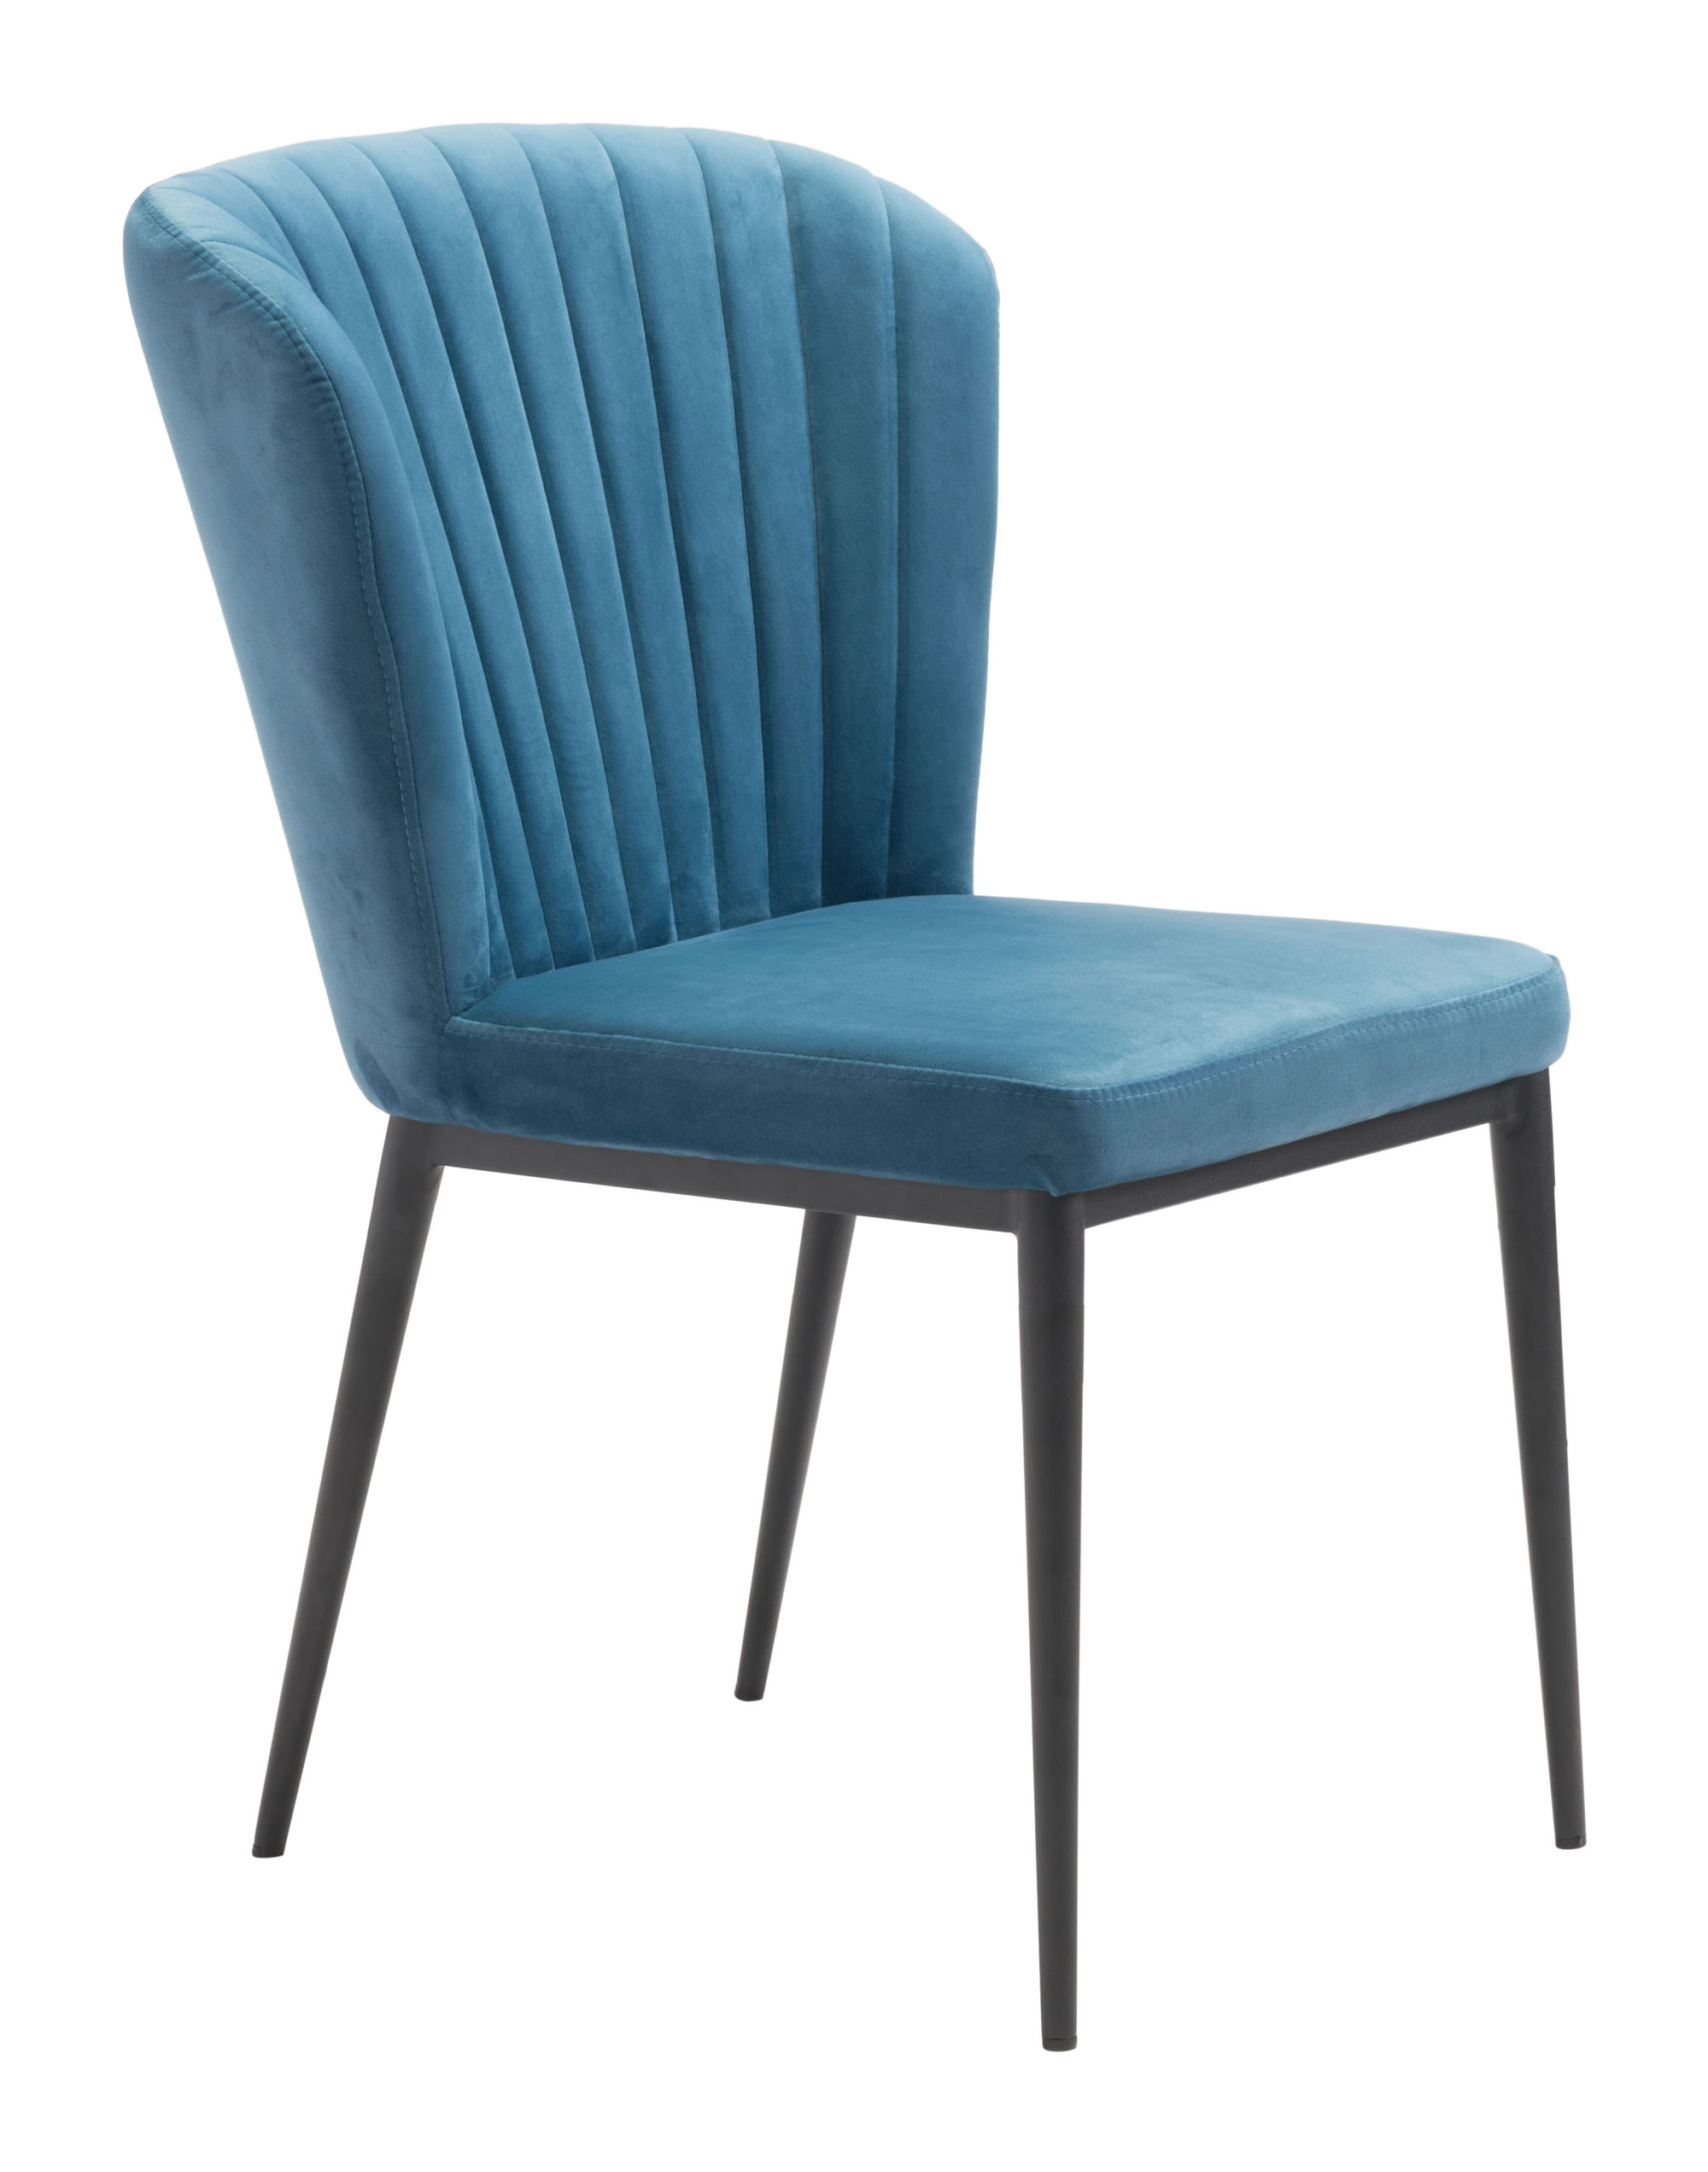 Fashionable Teal Blue Tufted Velvet Dining or Side Chairs - Set of 2